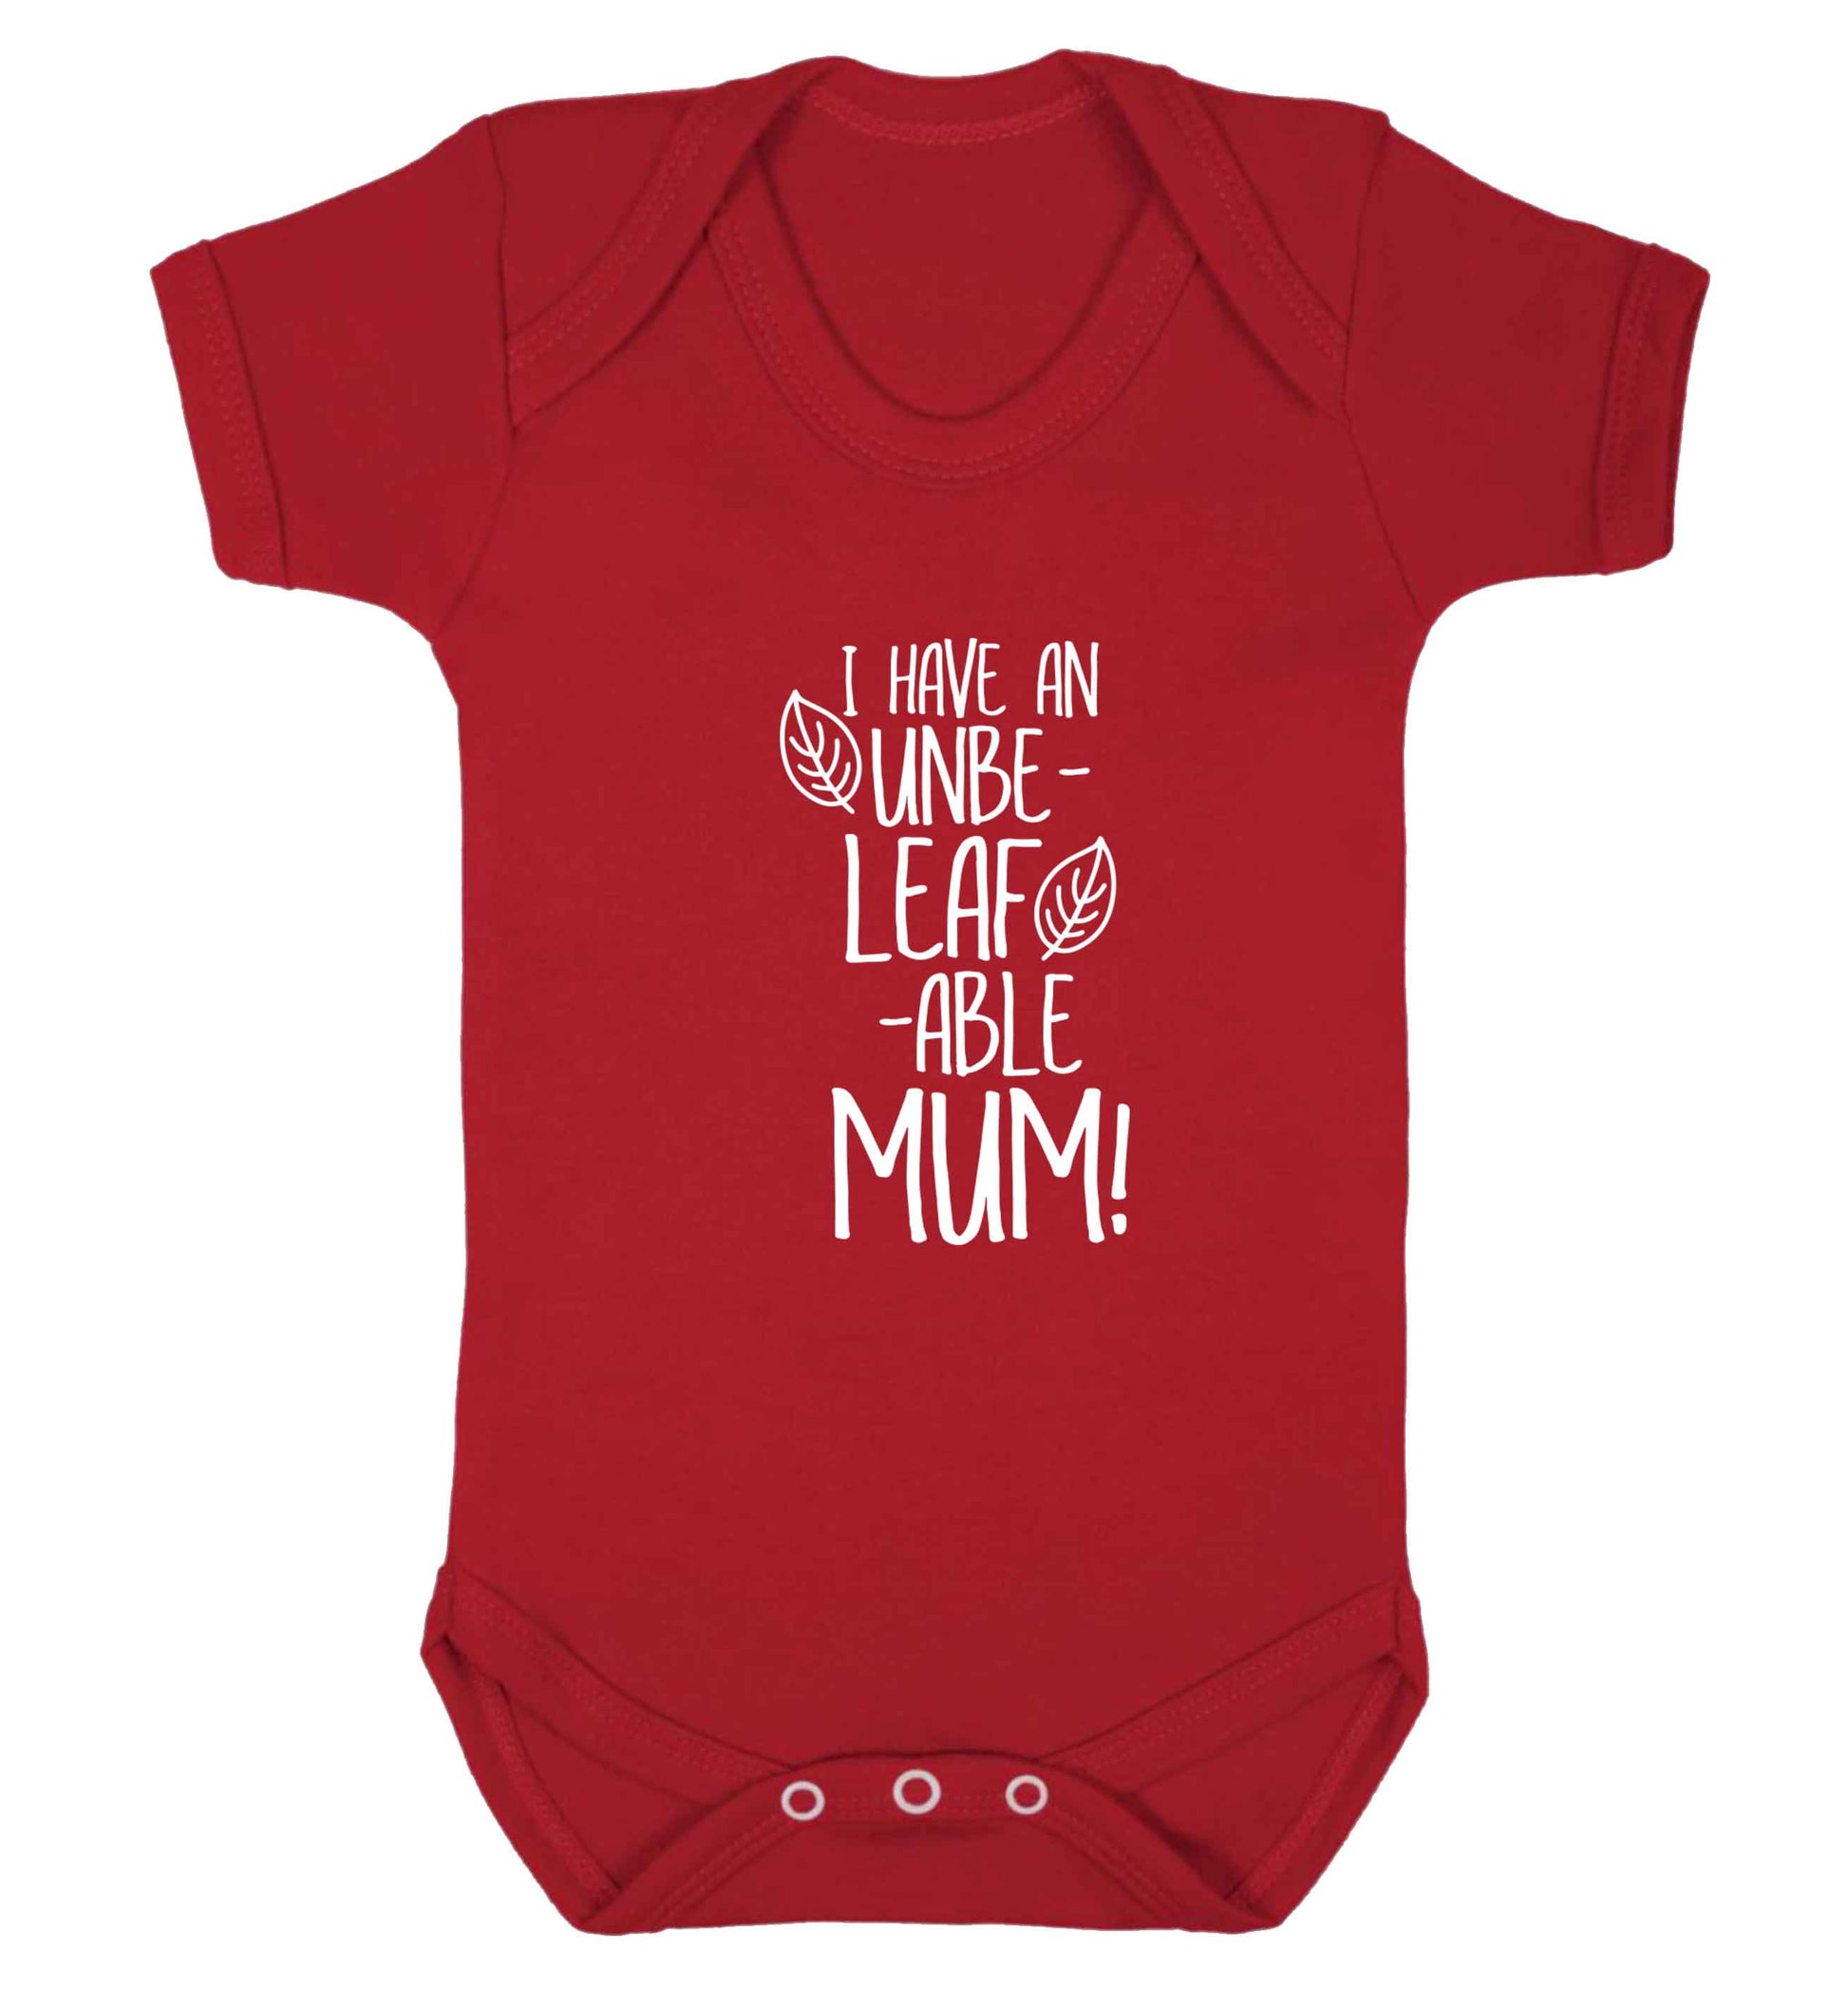 I have an unbeleafable mum! baby vest red 18-24 months